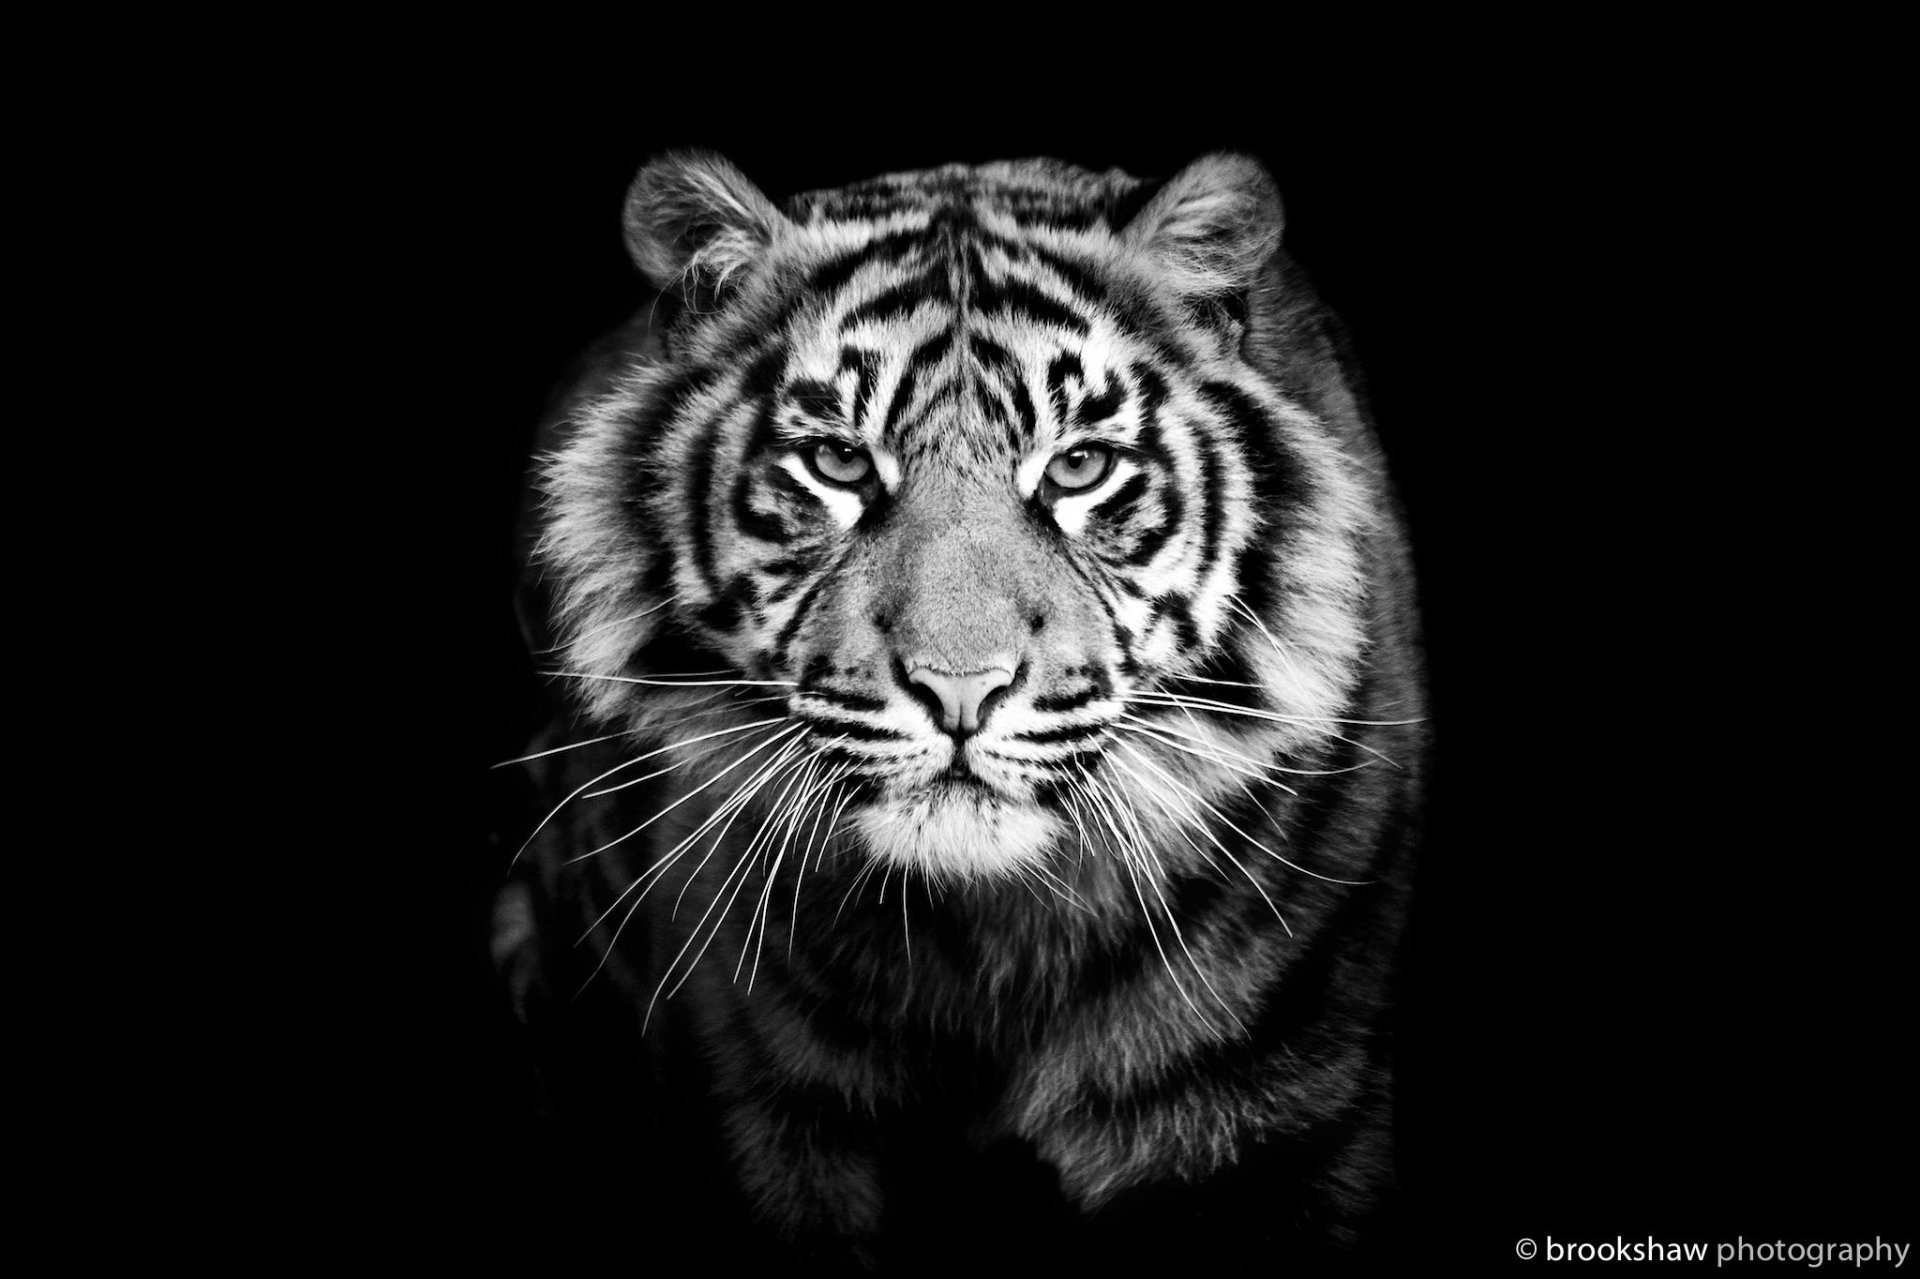 Tiger Predator Close Up Black And White Black Background - Tigers Black And  White - 1920x1279 Wallpaper 